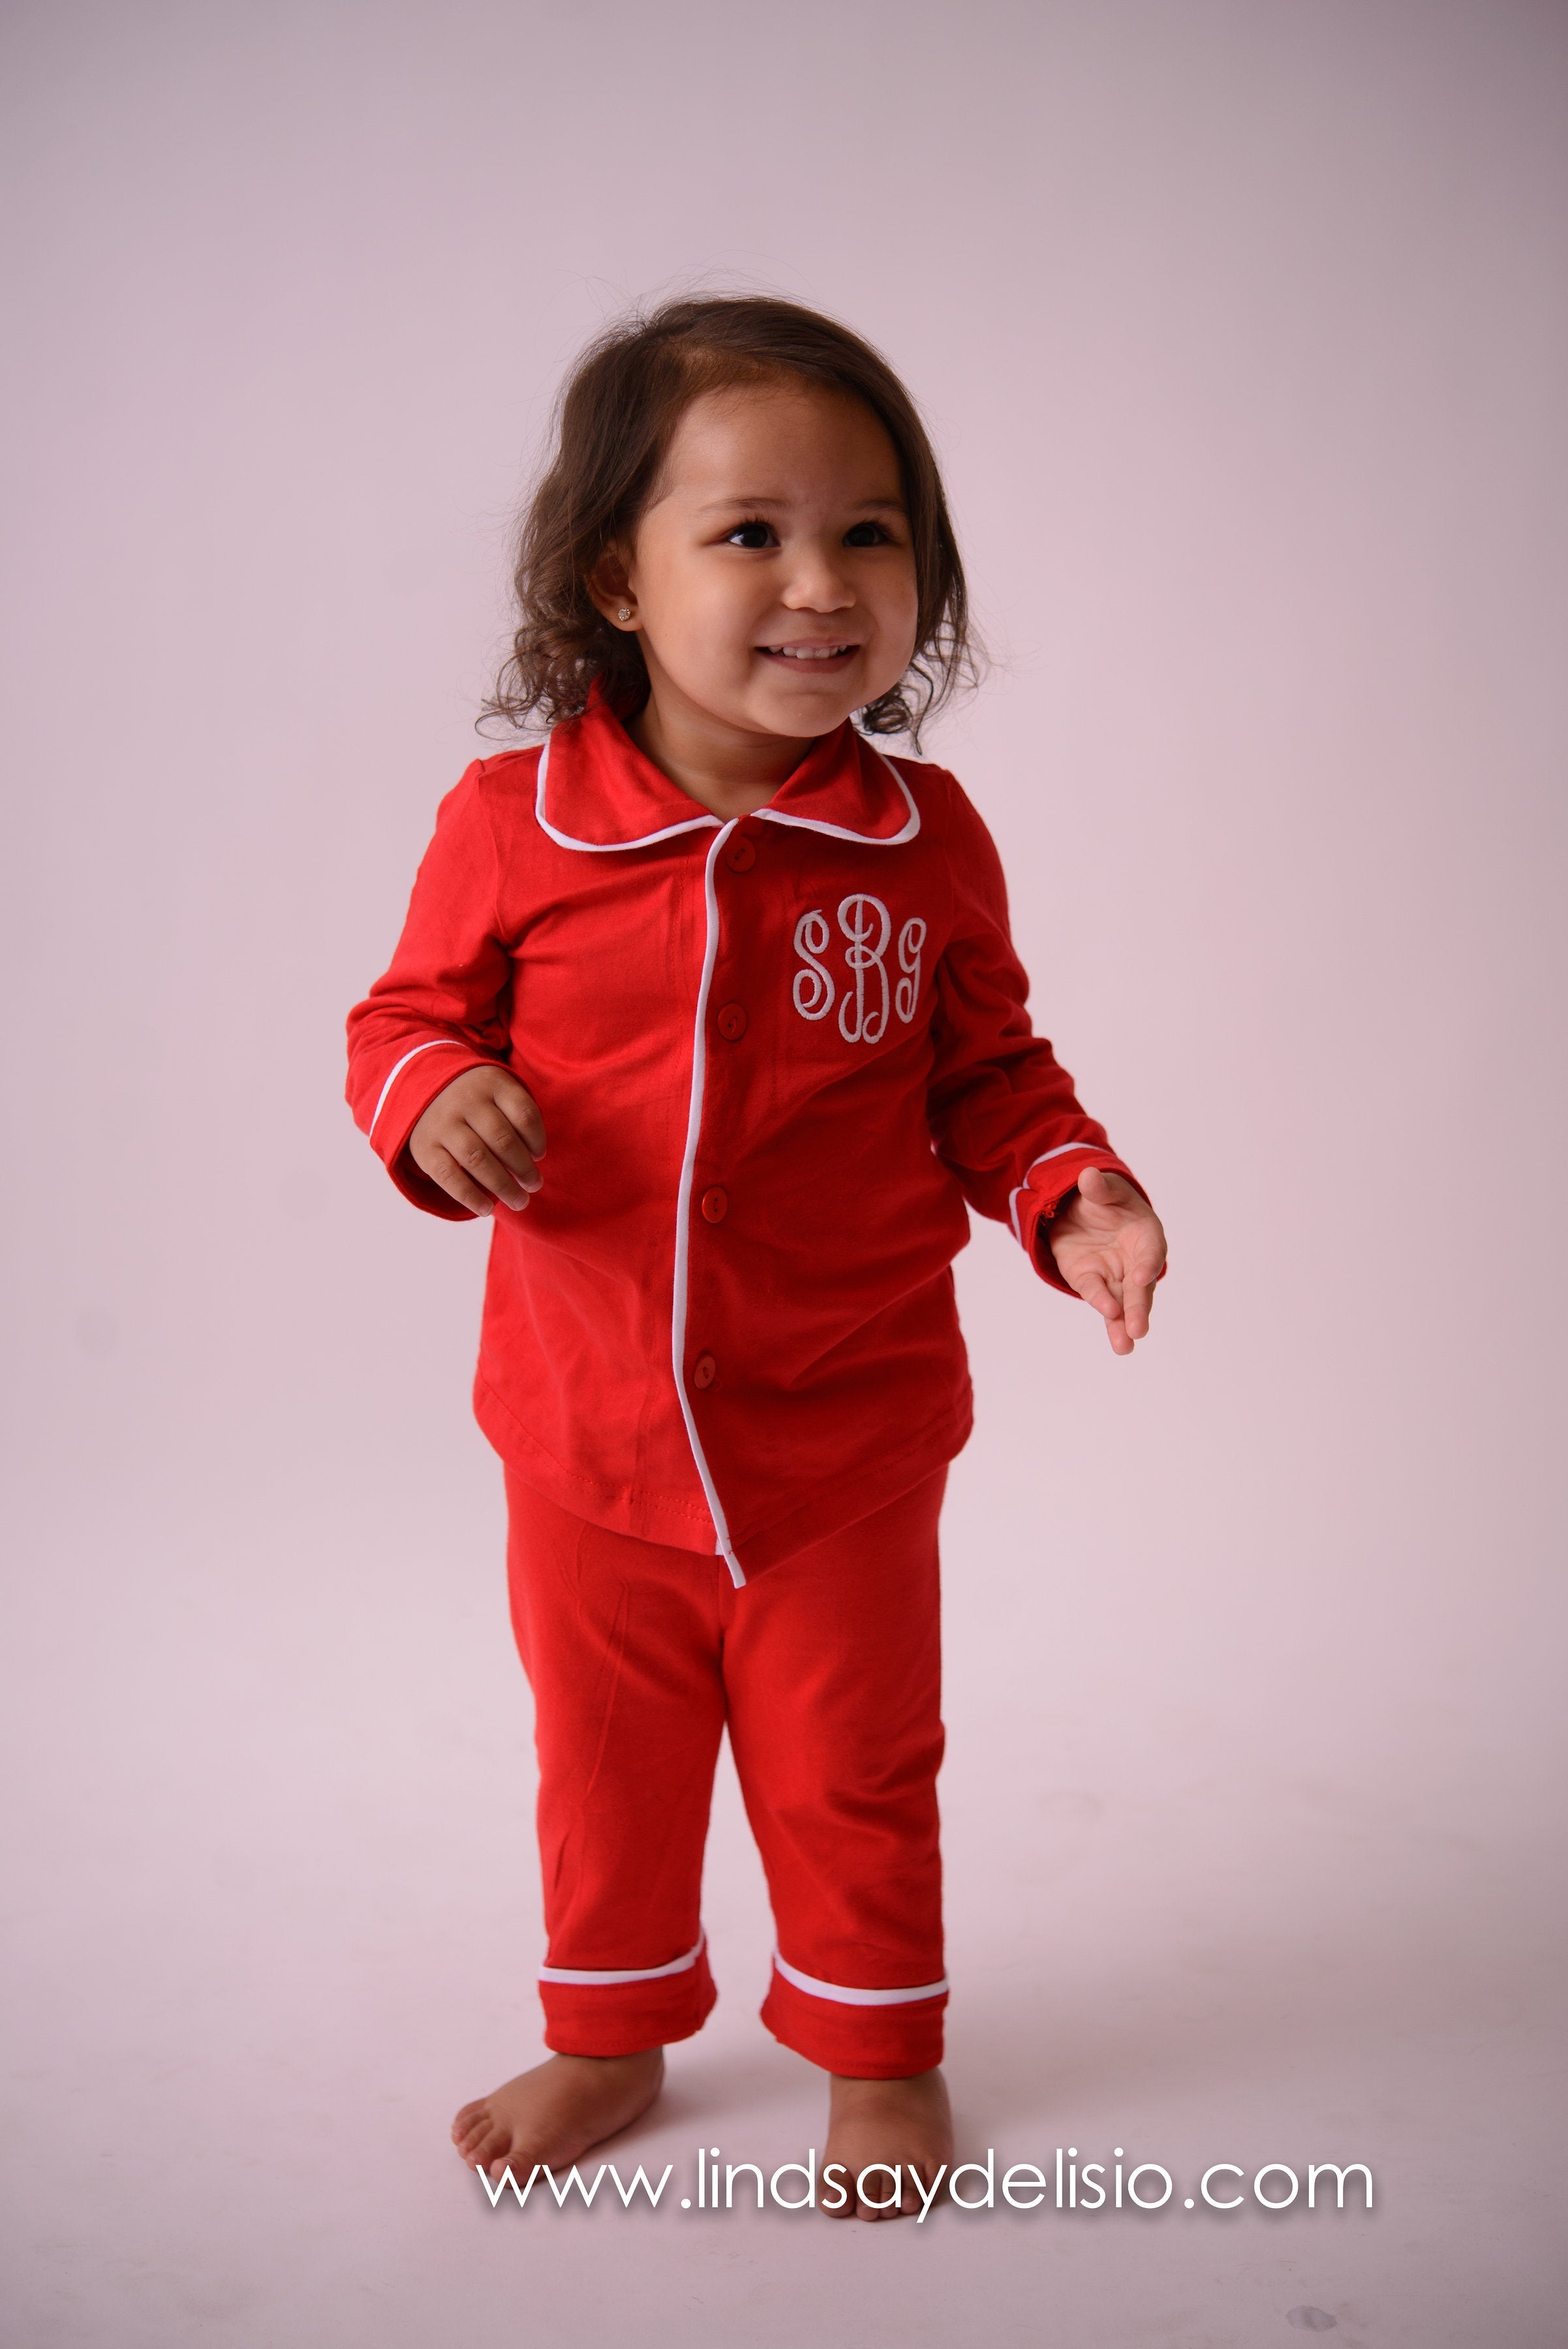 Family Christmas Outfit for Kids Monogrammed in Sizes 0-3 Months to Adult